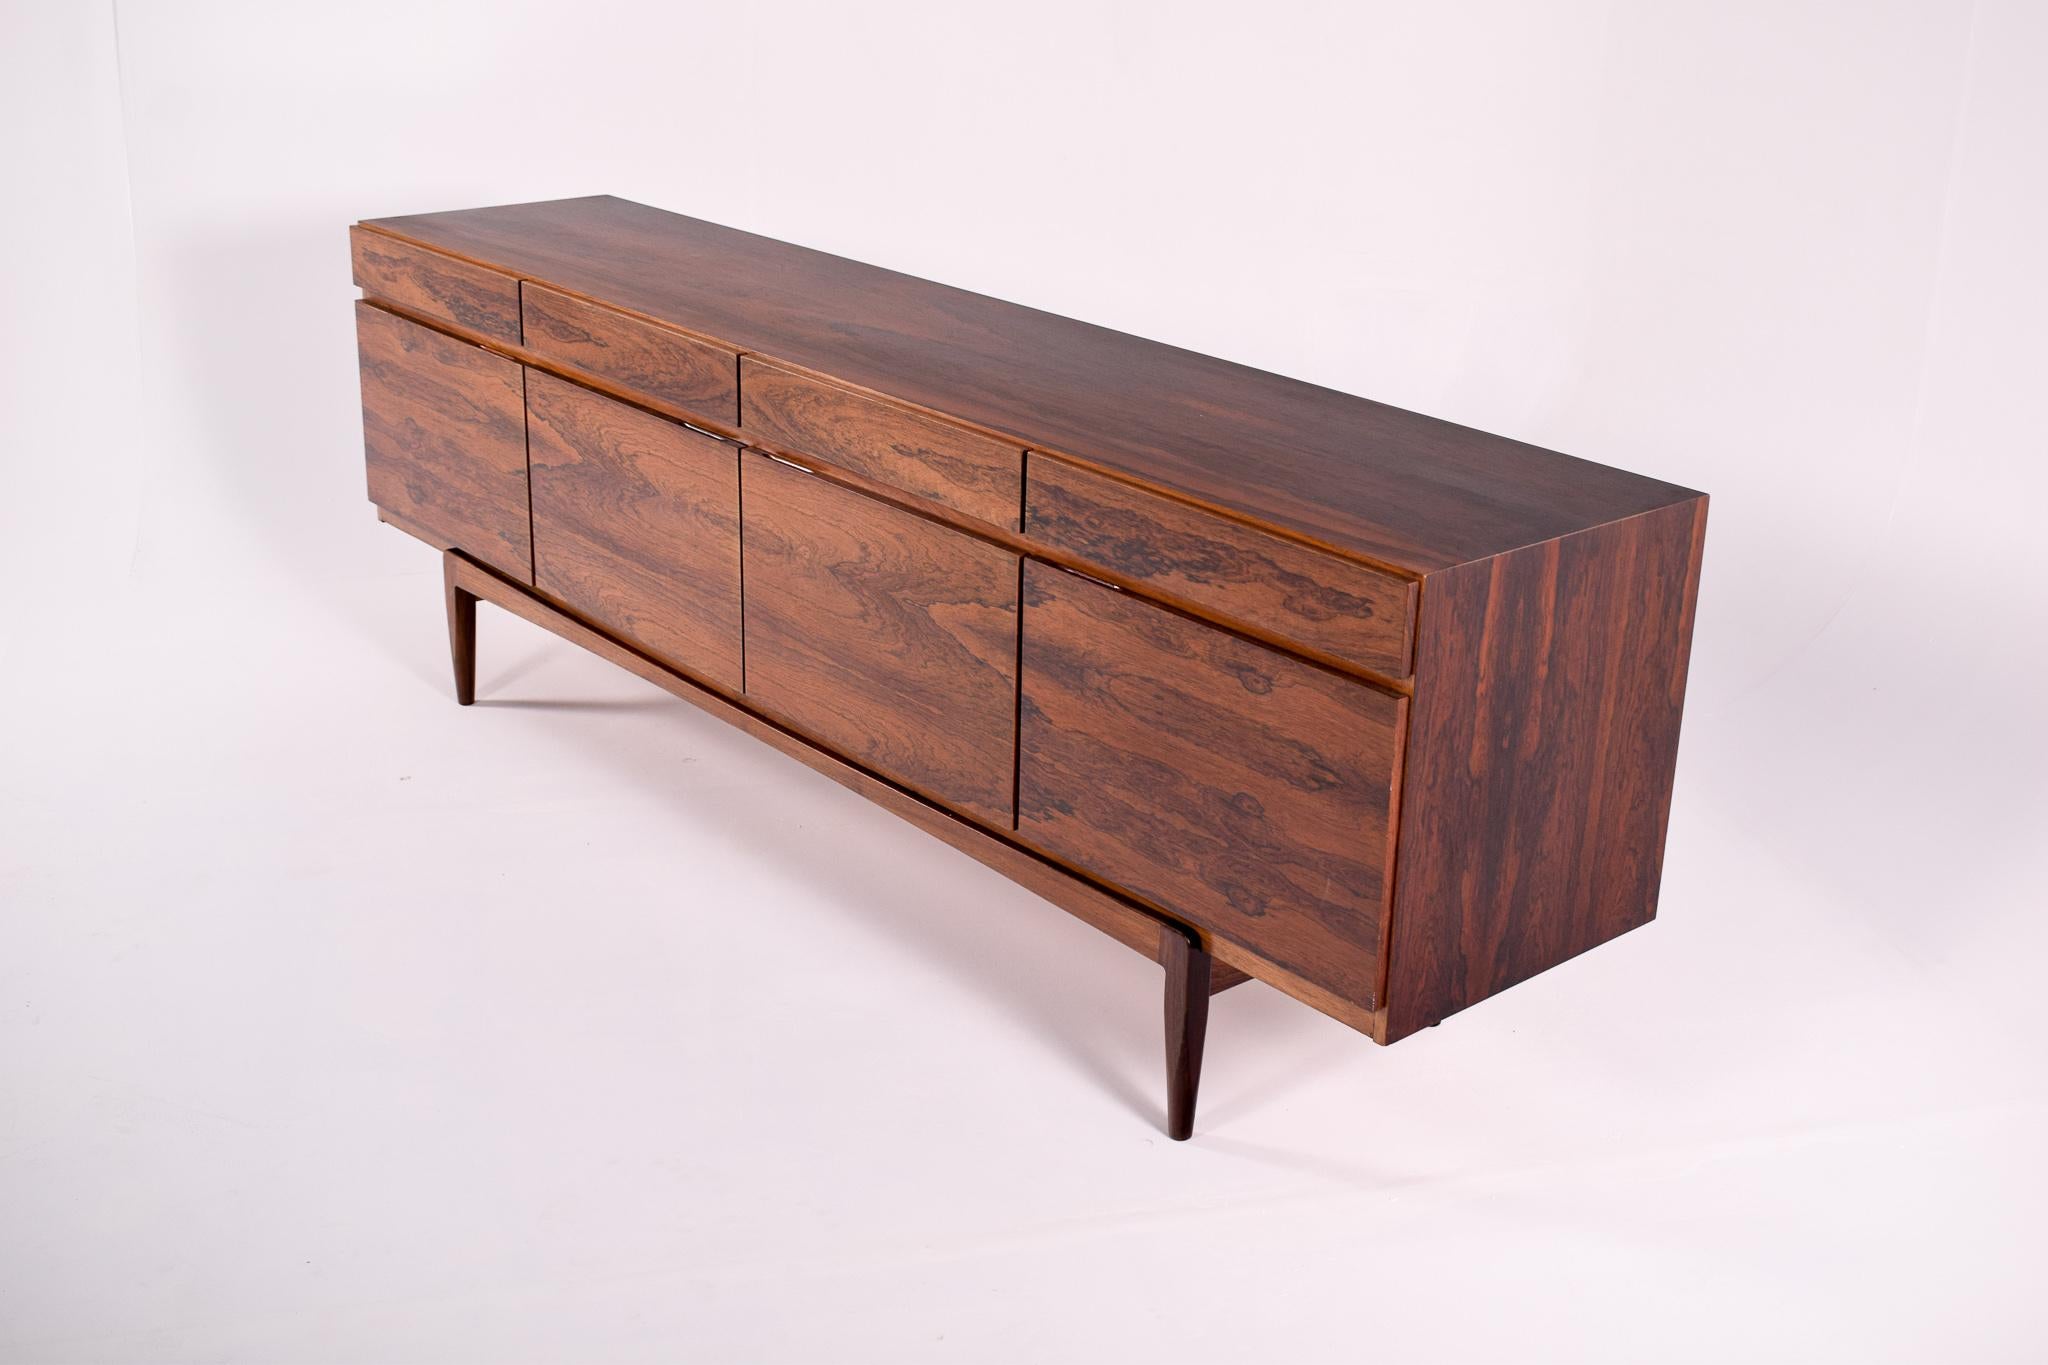 Designed by Ib Kofod-Larsen and manufactured in Denmark in the 1960s, this clean-lined sideboard features beautifully rosewood. The case sits on a raised base and offers four drawers above a four-door cabinet.